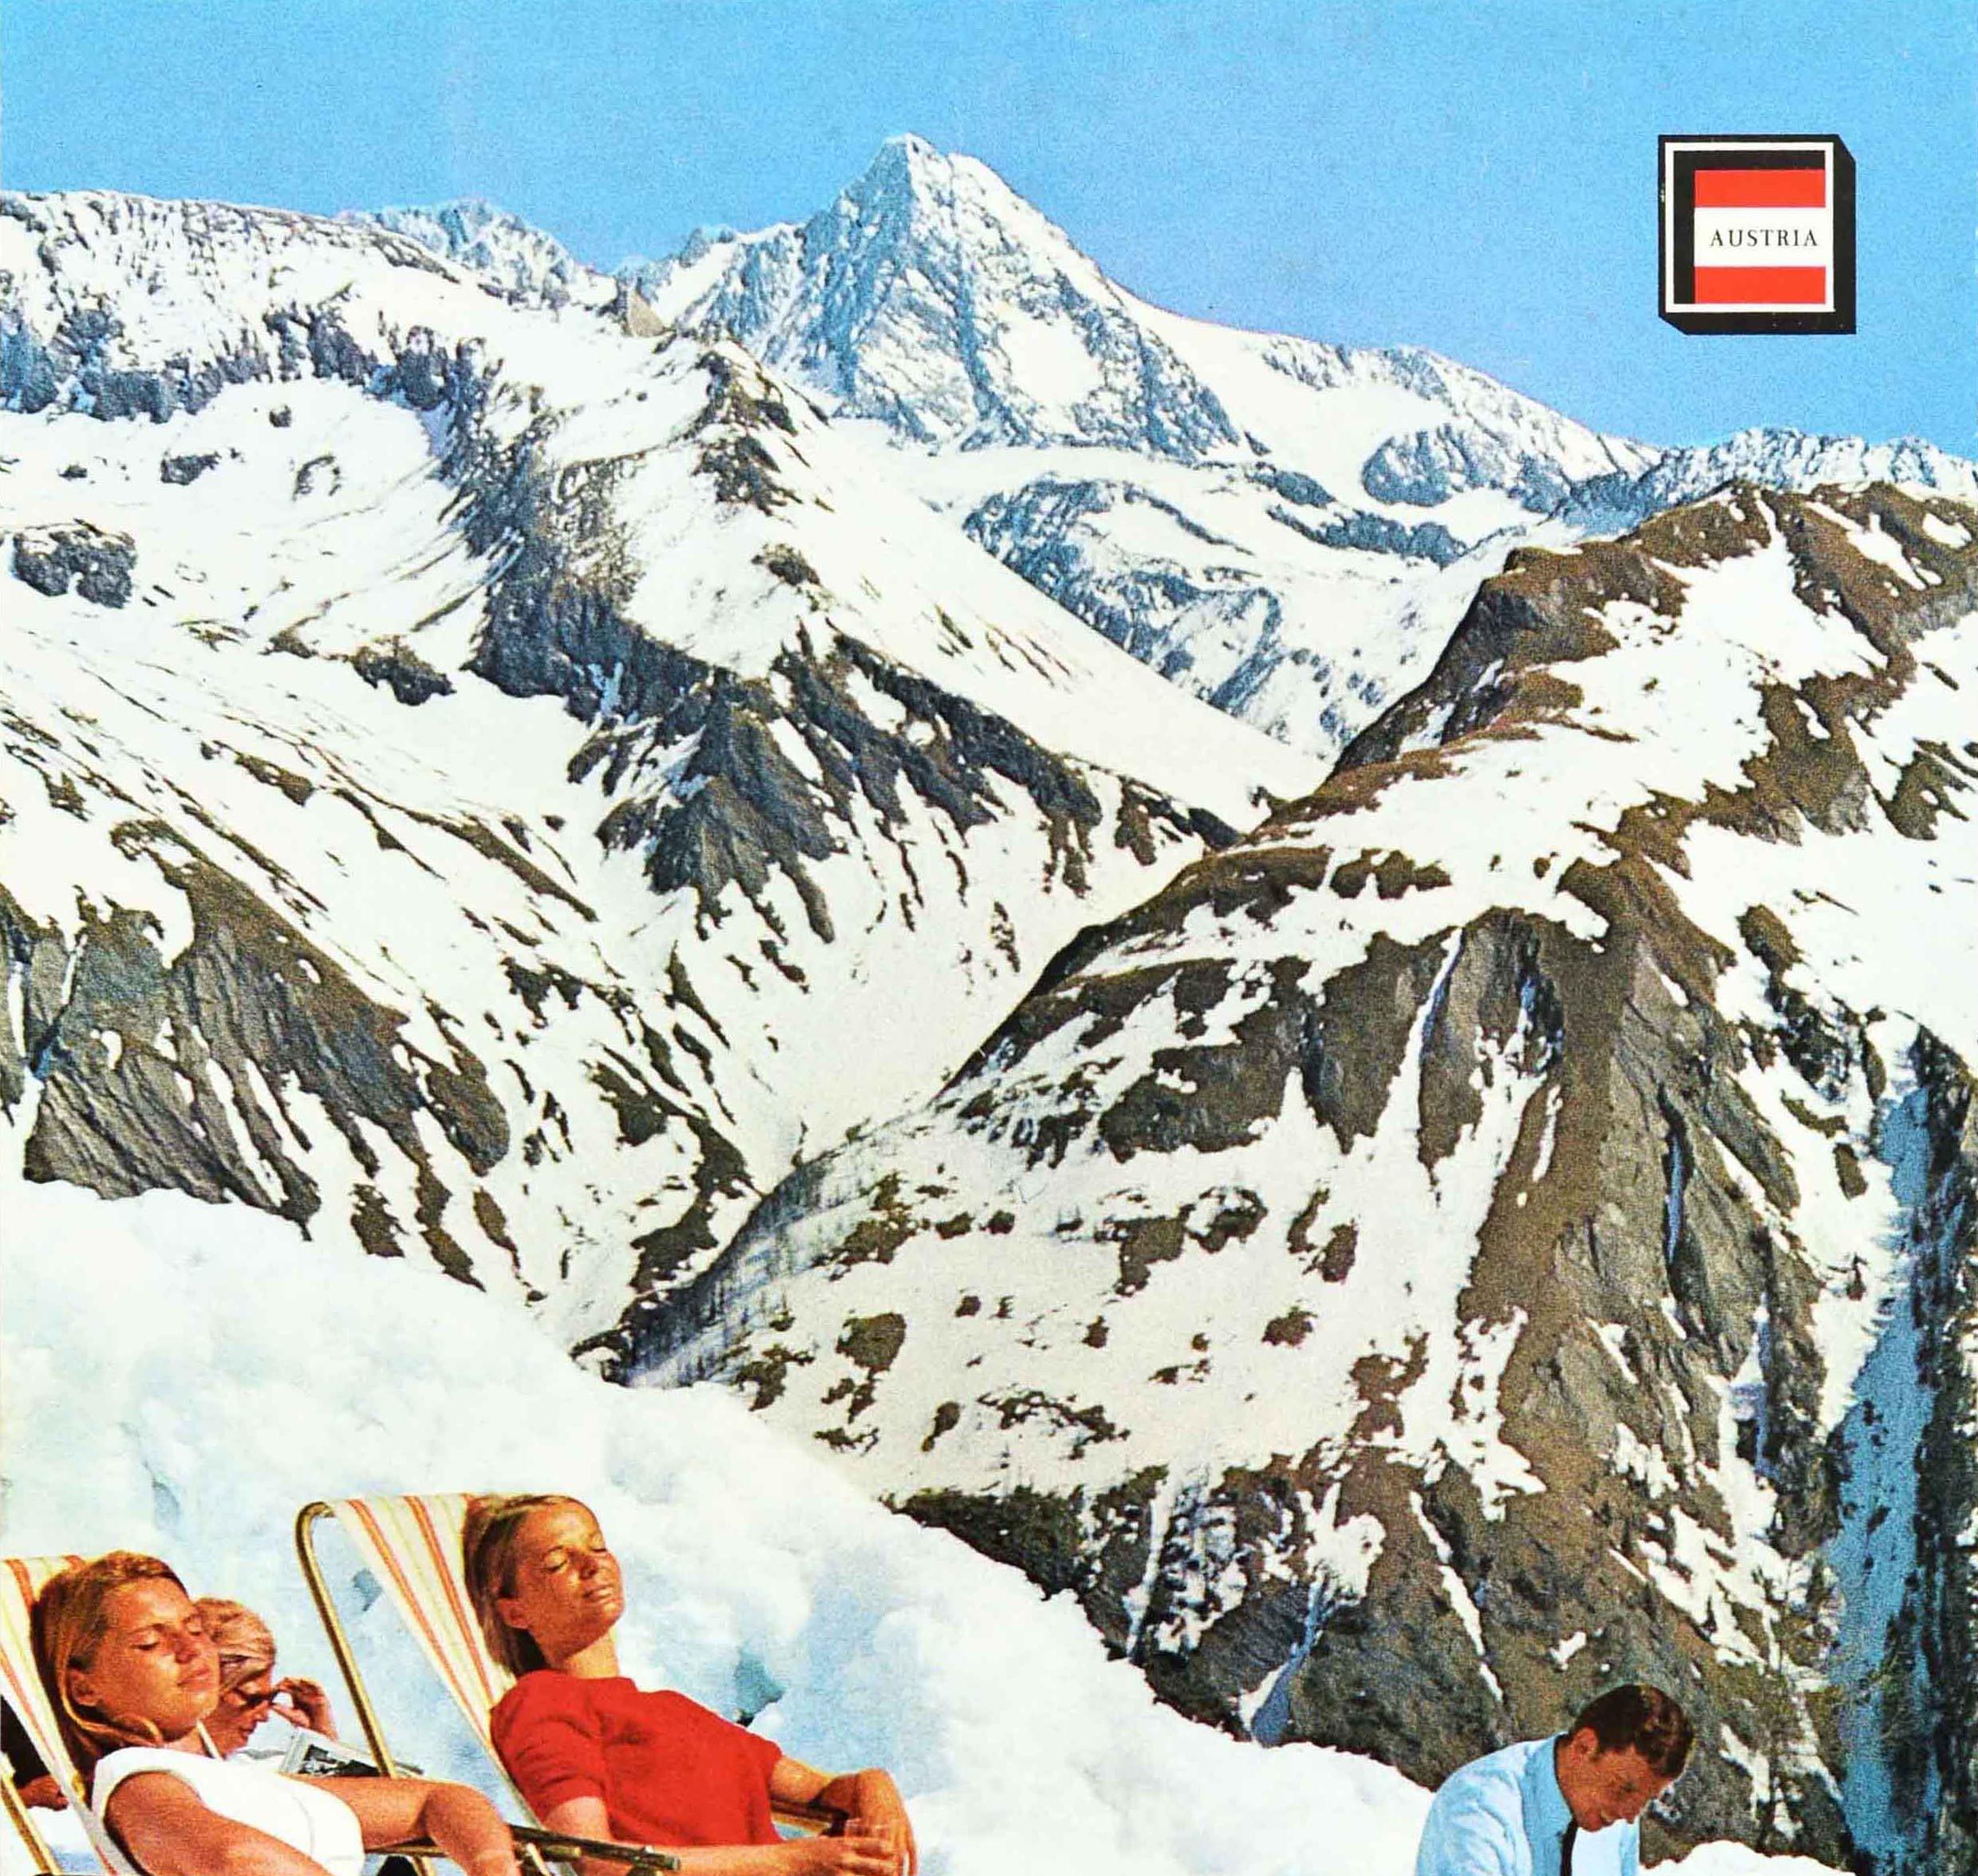 Original vintage winter sport travel poster for Osterreich Autriche Austria featuring skiers relaxing and sunbathing on deck chairs in the thick snow wearing t-shirts and ski boots with a smiling man handing a drink to a lady behind bottles in the